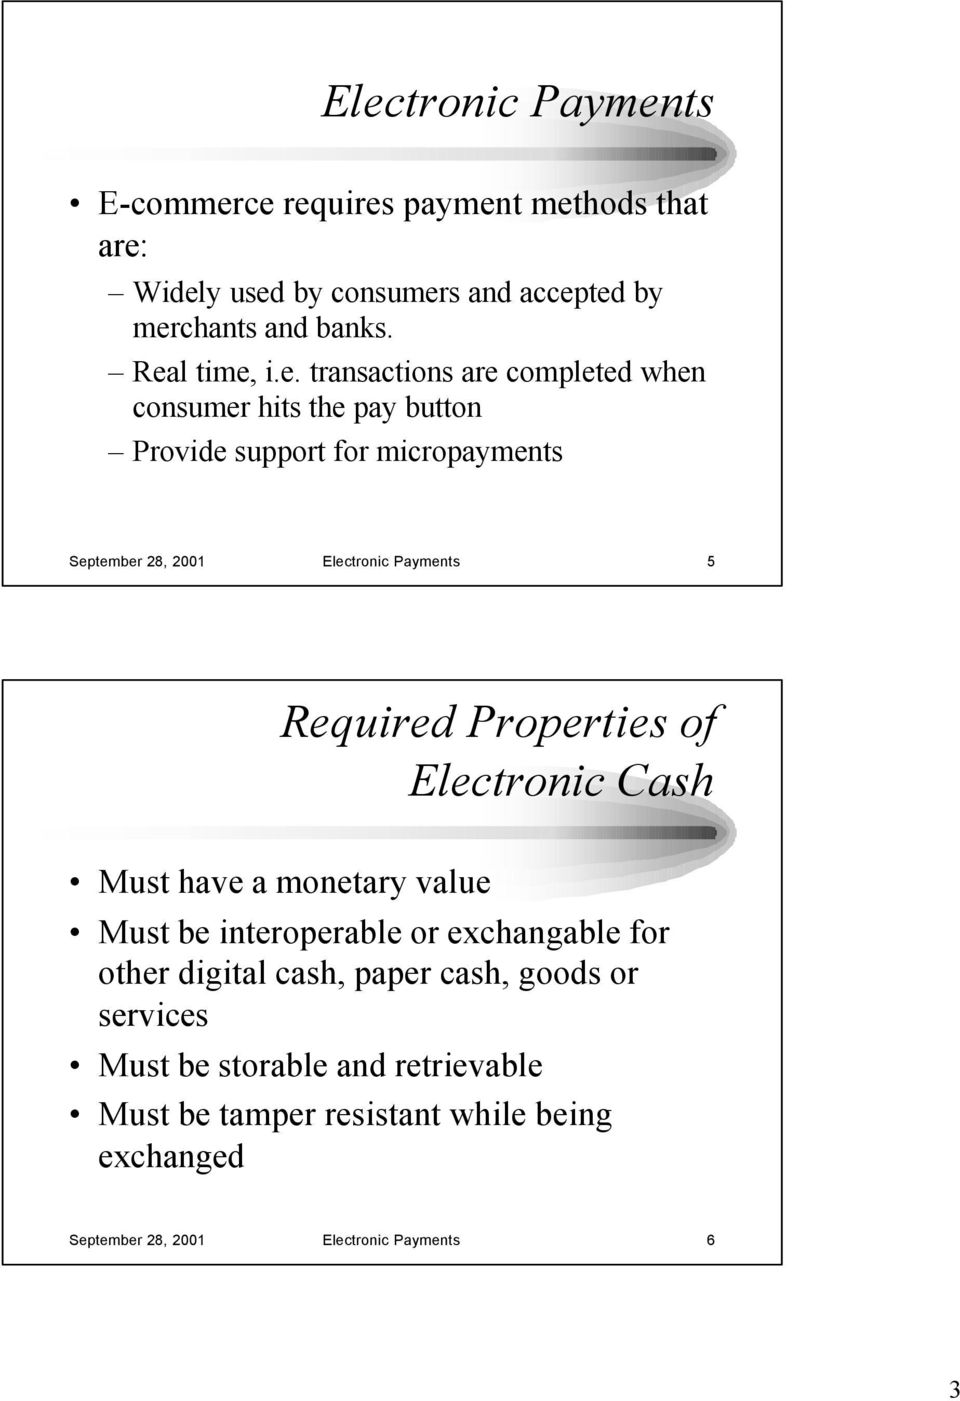 Electronic Payments 5 Required Properties of Electronic Cash Must have a monetary value Must be interoperable or exchangable for other